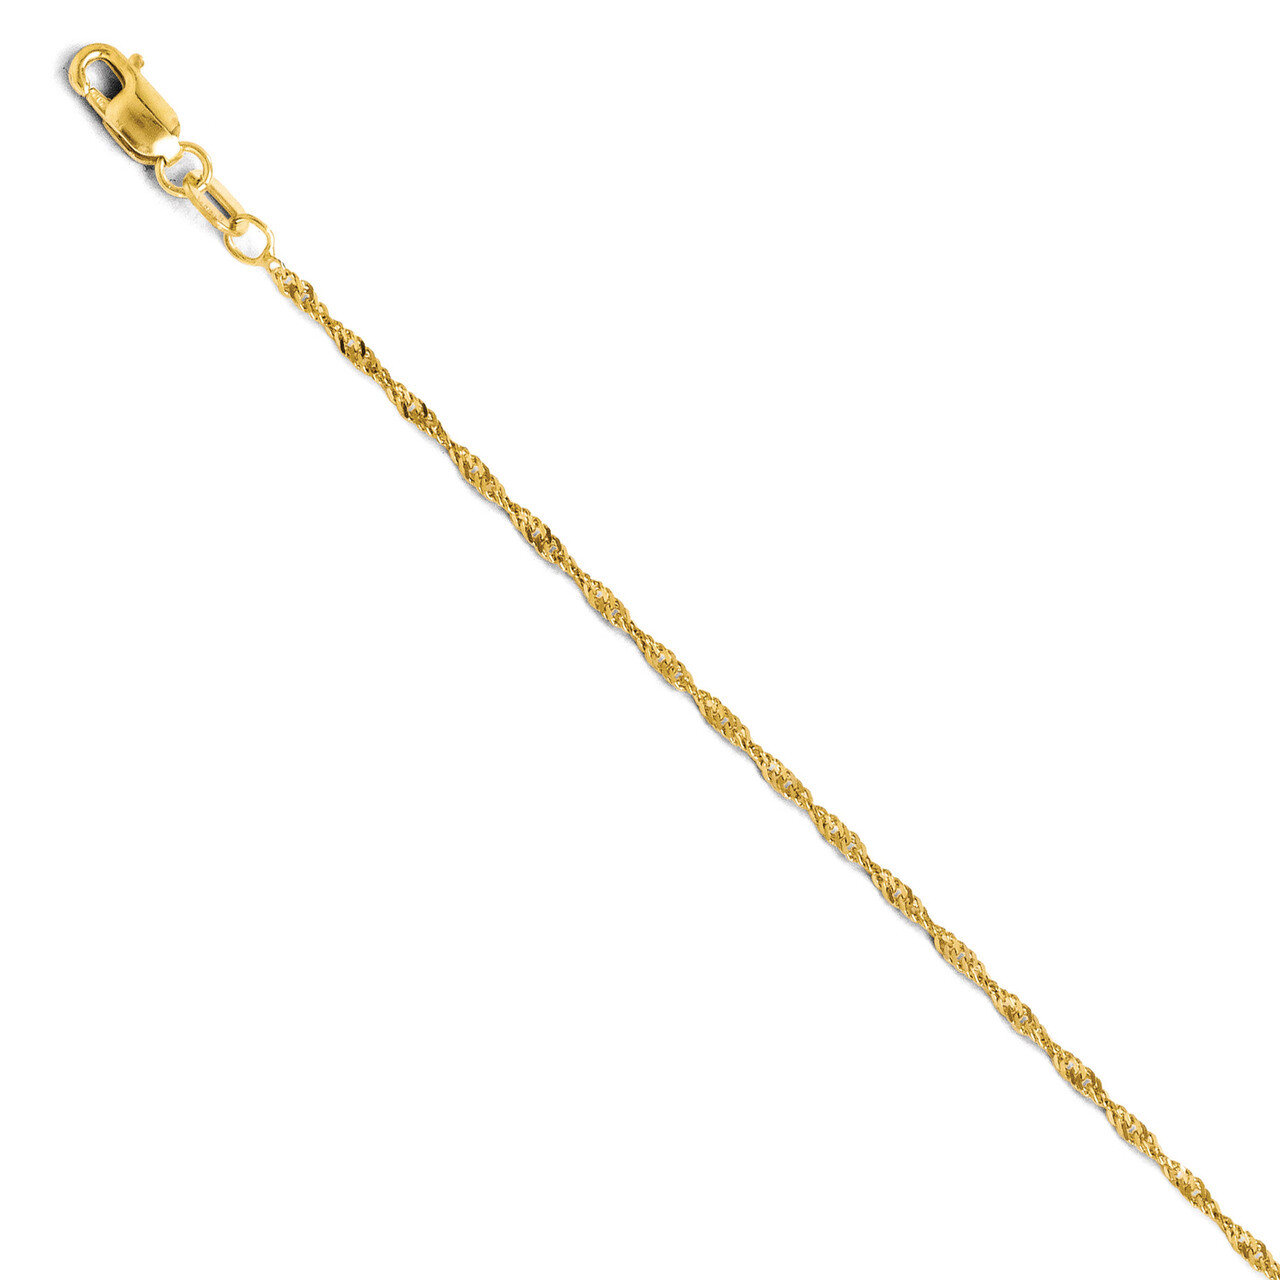 Singapore with Lock Chain 20 Inch - 14k Gold HB-503-20